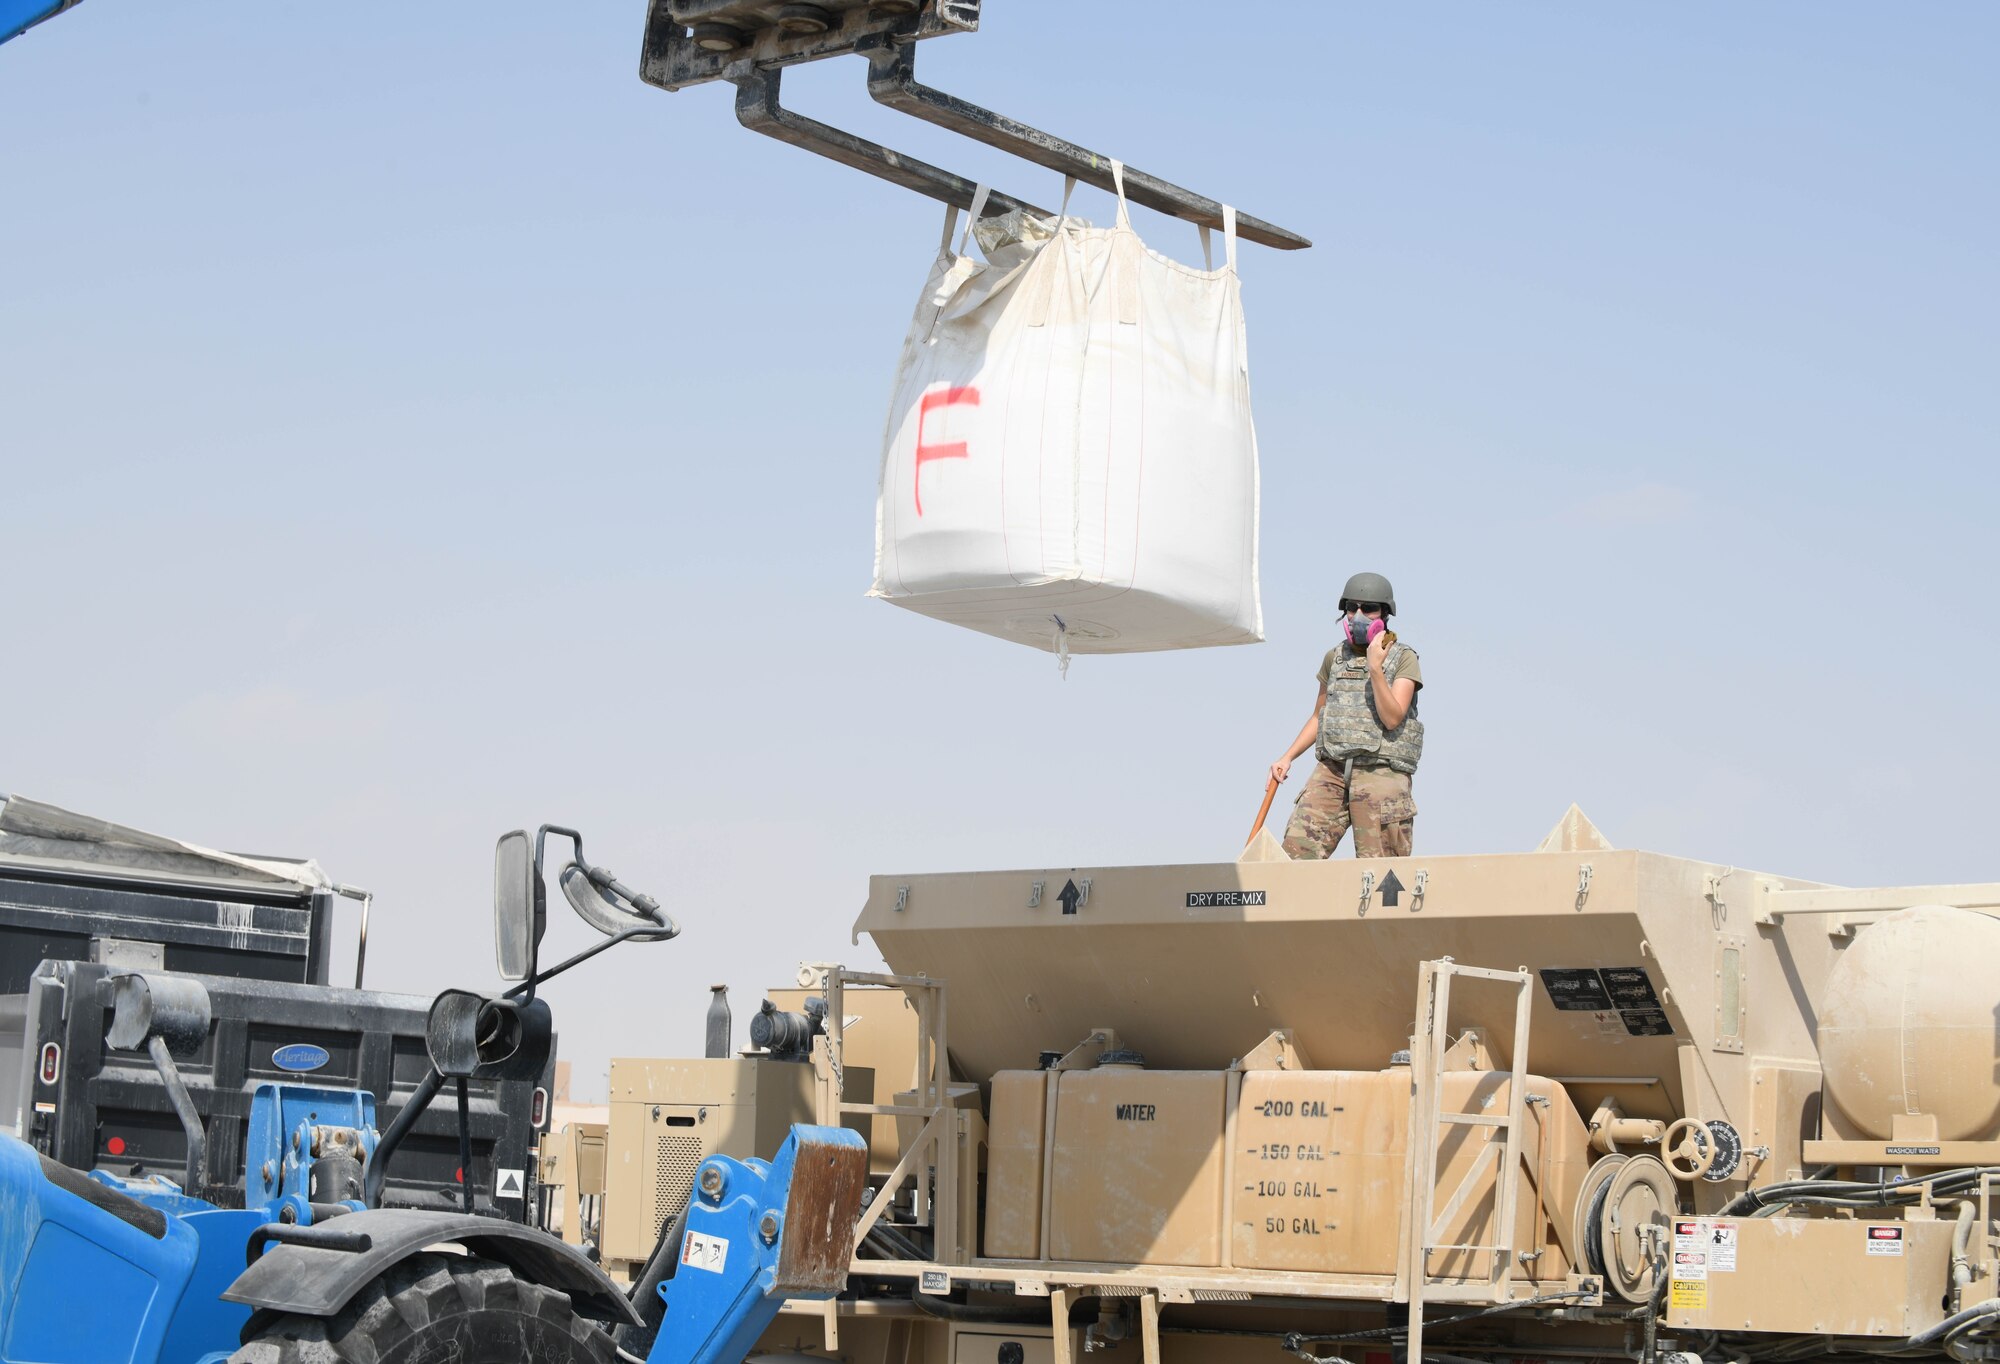 U.S. Air Force Staff Sgt. Jessica Vadnais, with the 379th Expeditionary Civil Engineer Squadron, guides a telescopic handler carrying an industrial-sized bag of concrete toward a cement mixer at Al Udeid Air Base, Qatar, Nov. 18, 2020. The 379th ECES Airmen repaired craters in a mock airfield as part of a rapid airfield damage repair training exercise, which helped prepare them to efficiently and expeditiously restore a damaged airfield to operational status. (U.S. Air Force photo by Staff Sgt. Kayla White)